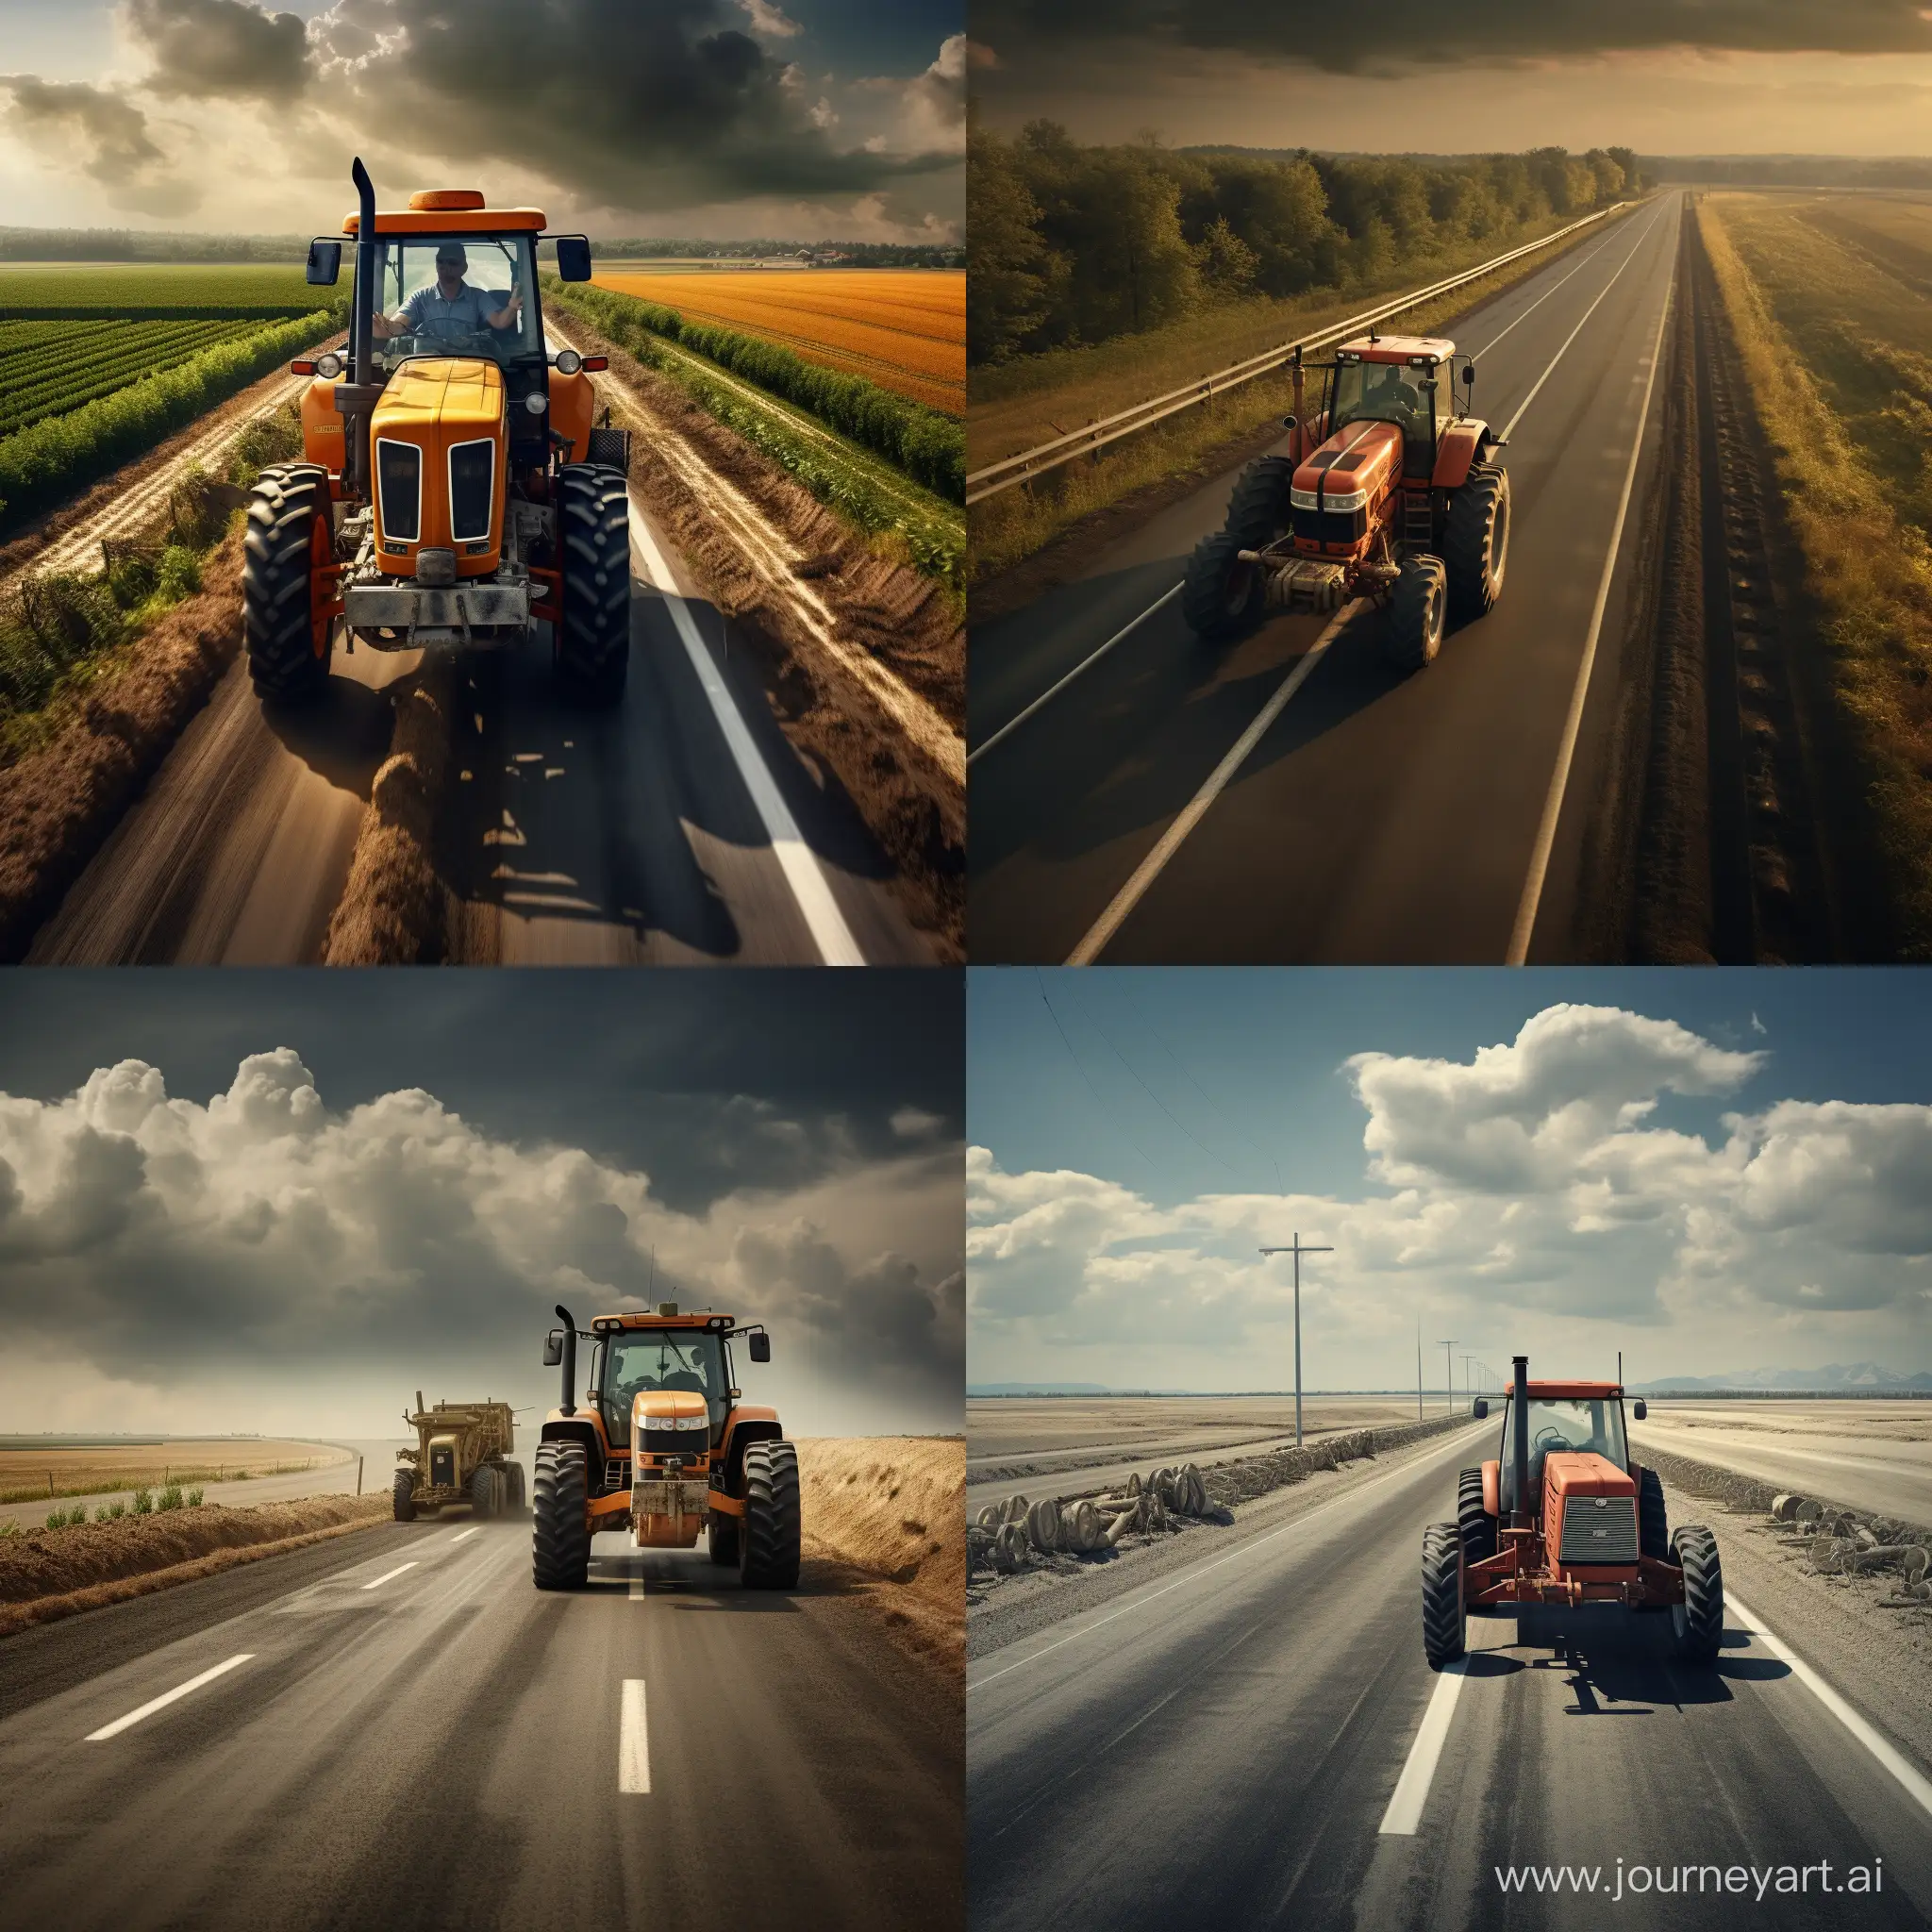 Tractor Driving on Highway Without Trailer